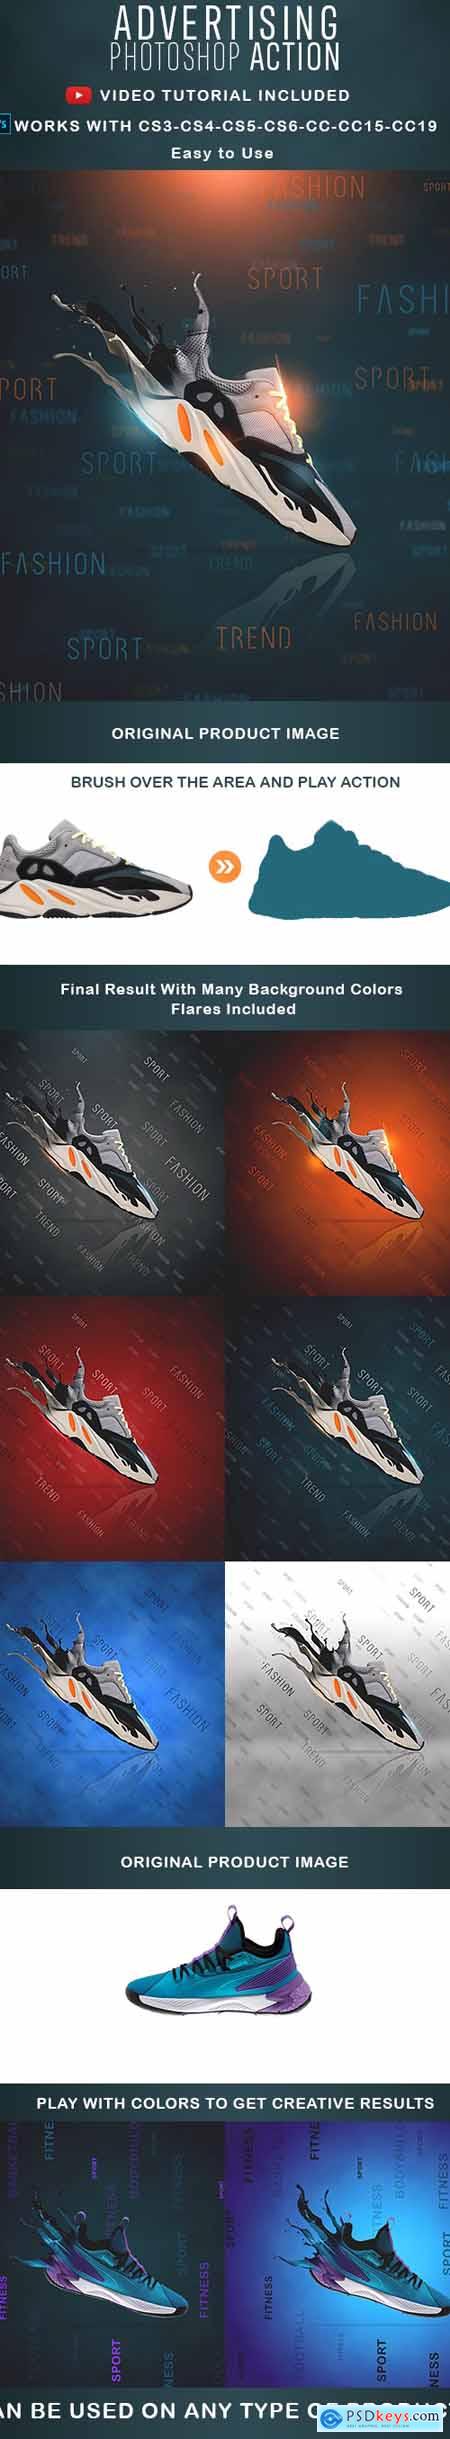 Advertising Dispersion Photoshop Actions 24302120